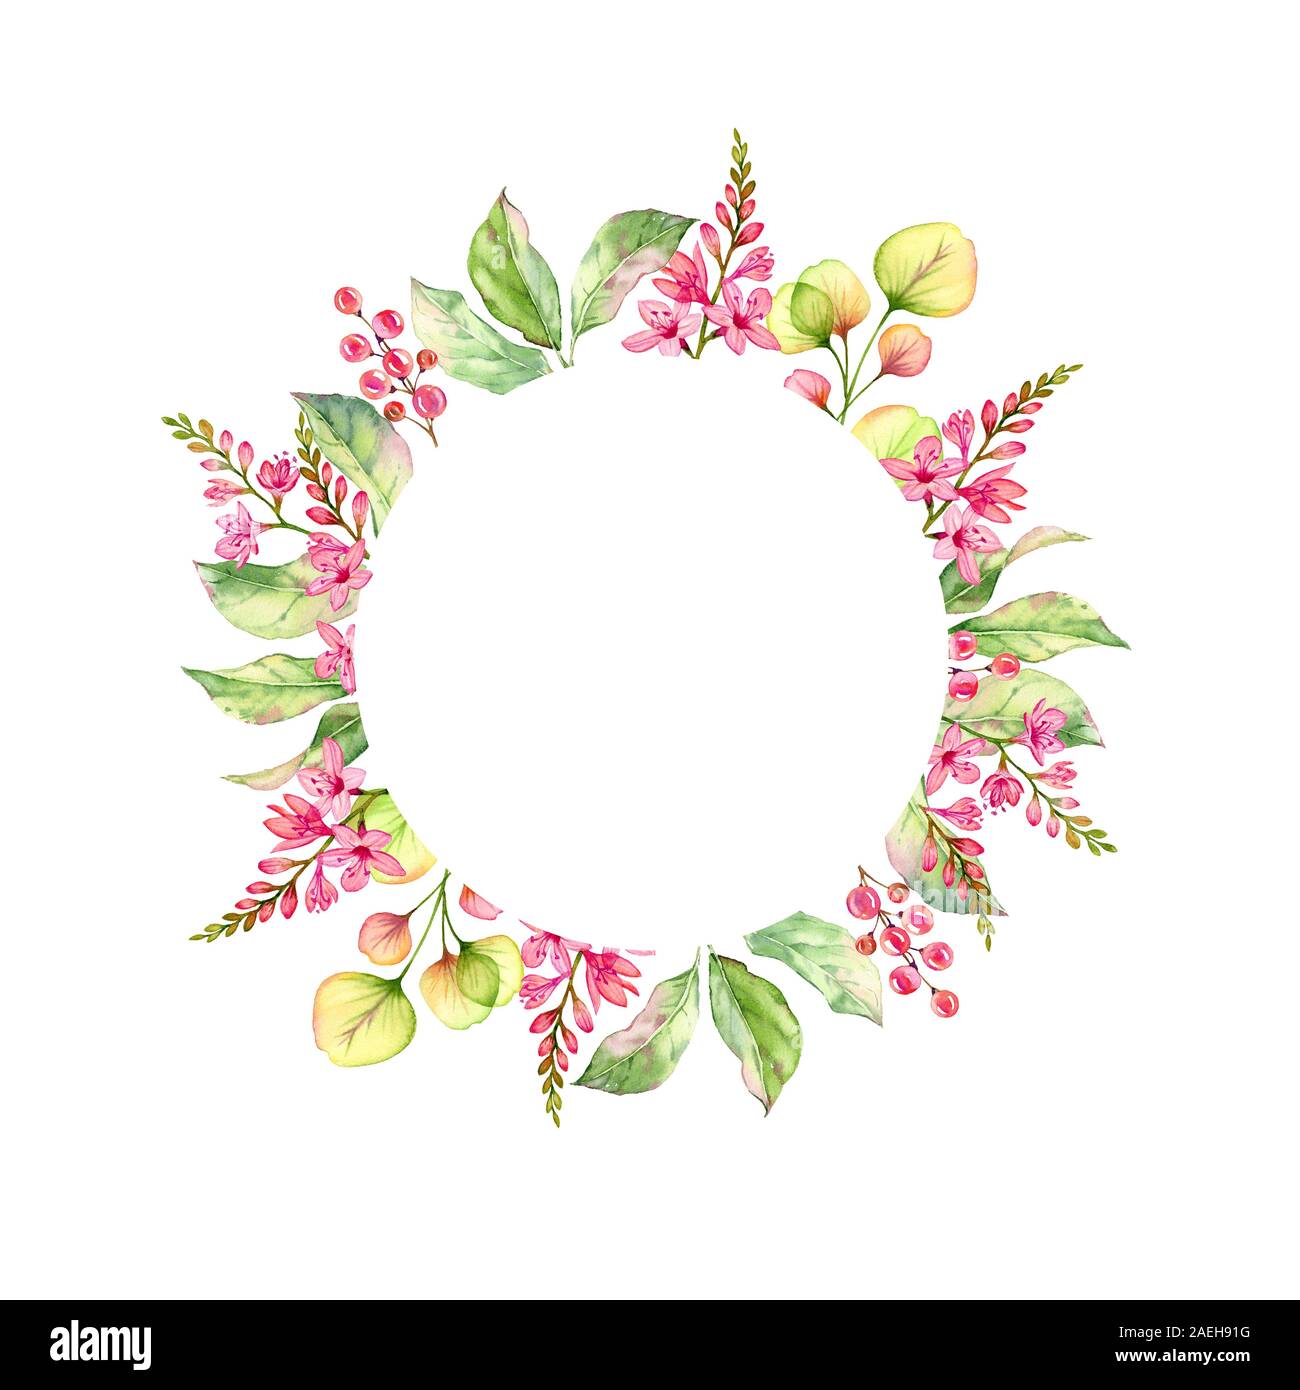 Watercolor floral round frame with freesia and wild flowers and place for text. Botanical hand painted illustration isolated in white for lettering Stock Photo